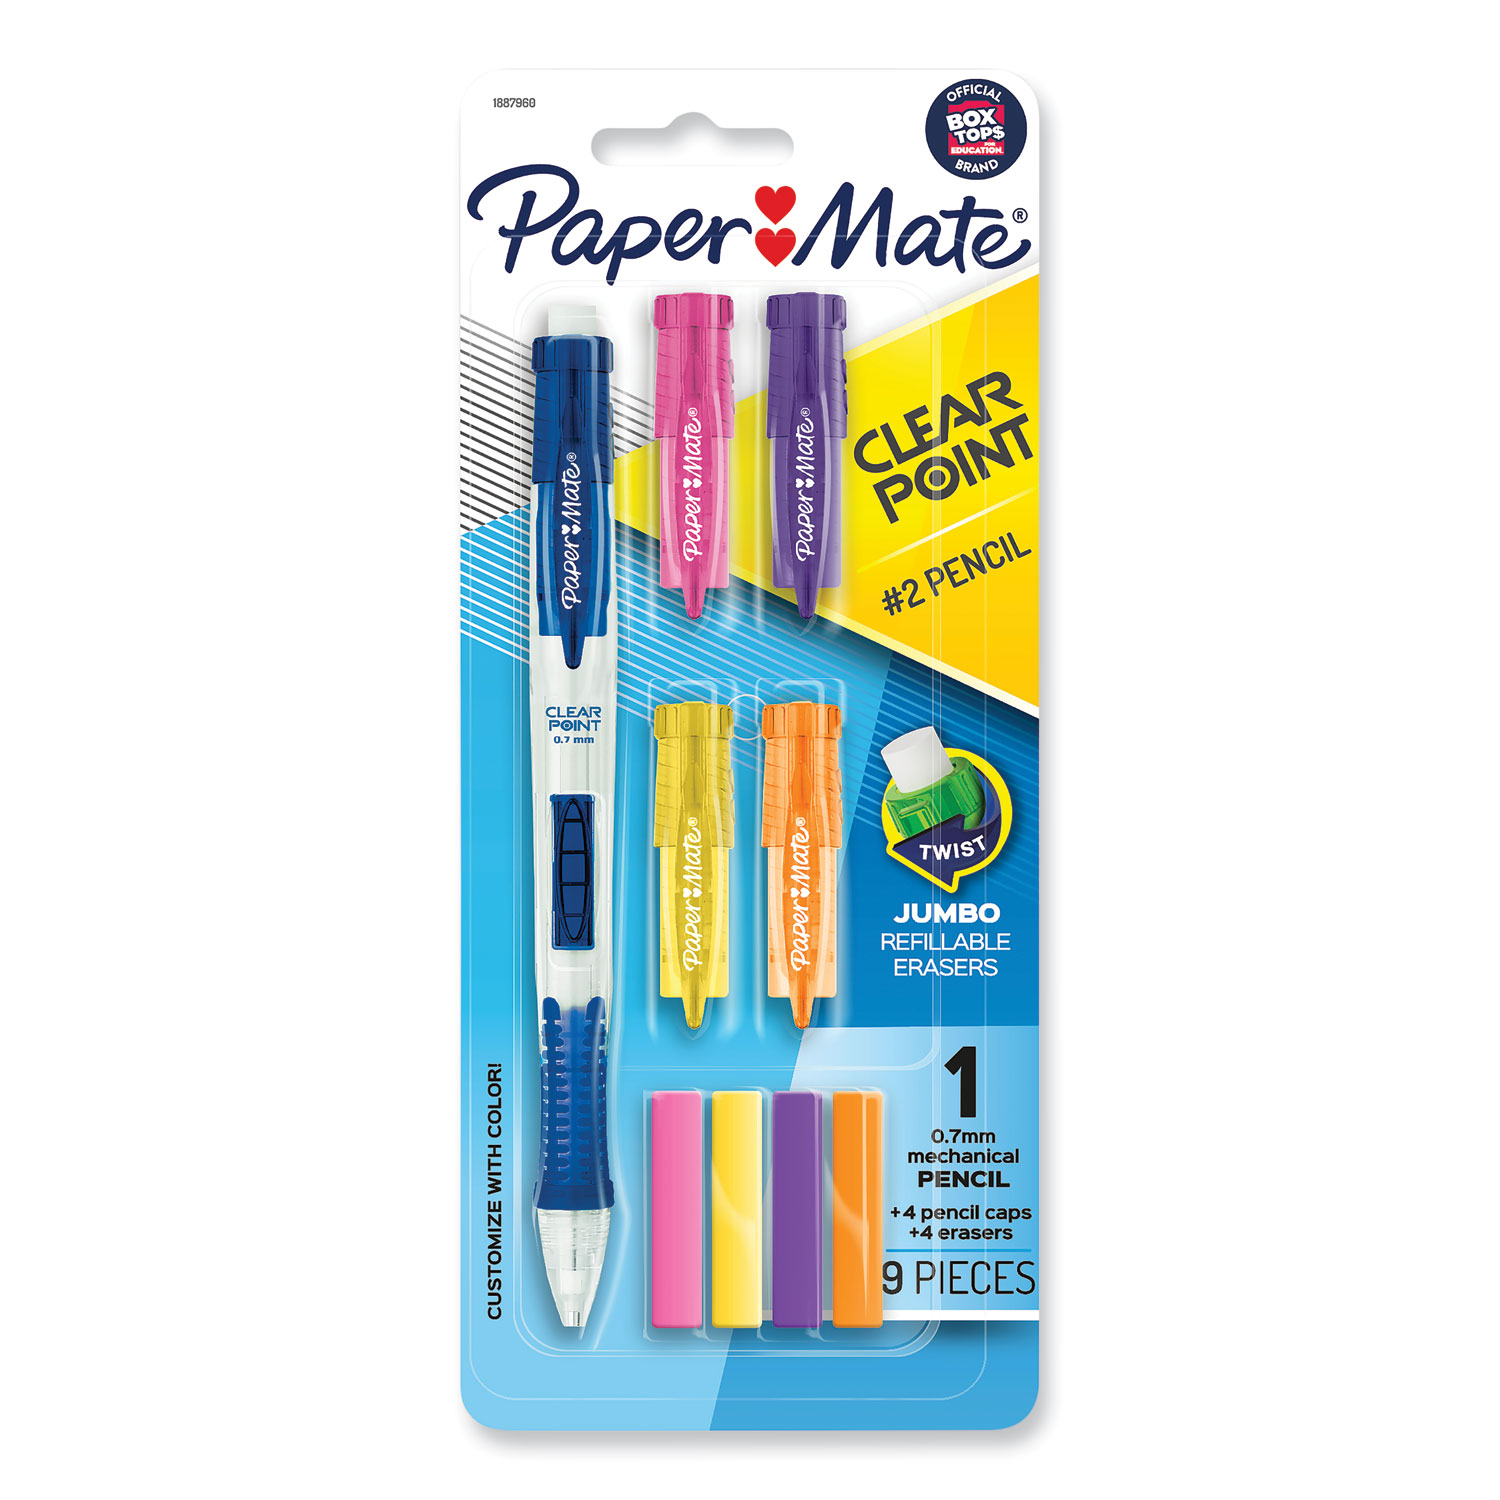 Paper Mate Clear Point Mechanical Pencil, 0.7 mm, HB (#2), Black Lead, Assorted Barrel Colors, 4/Pack